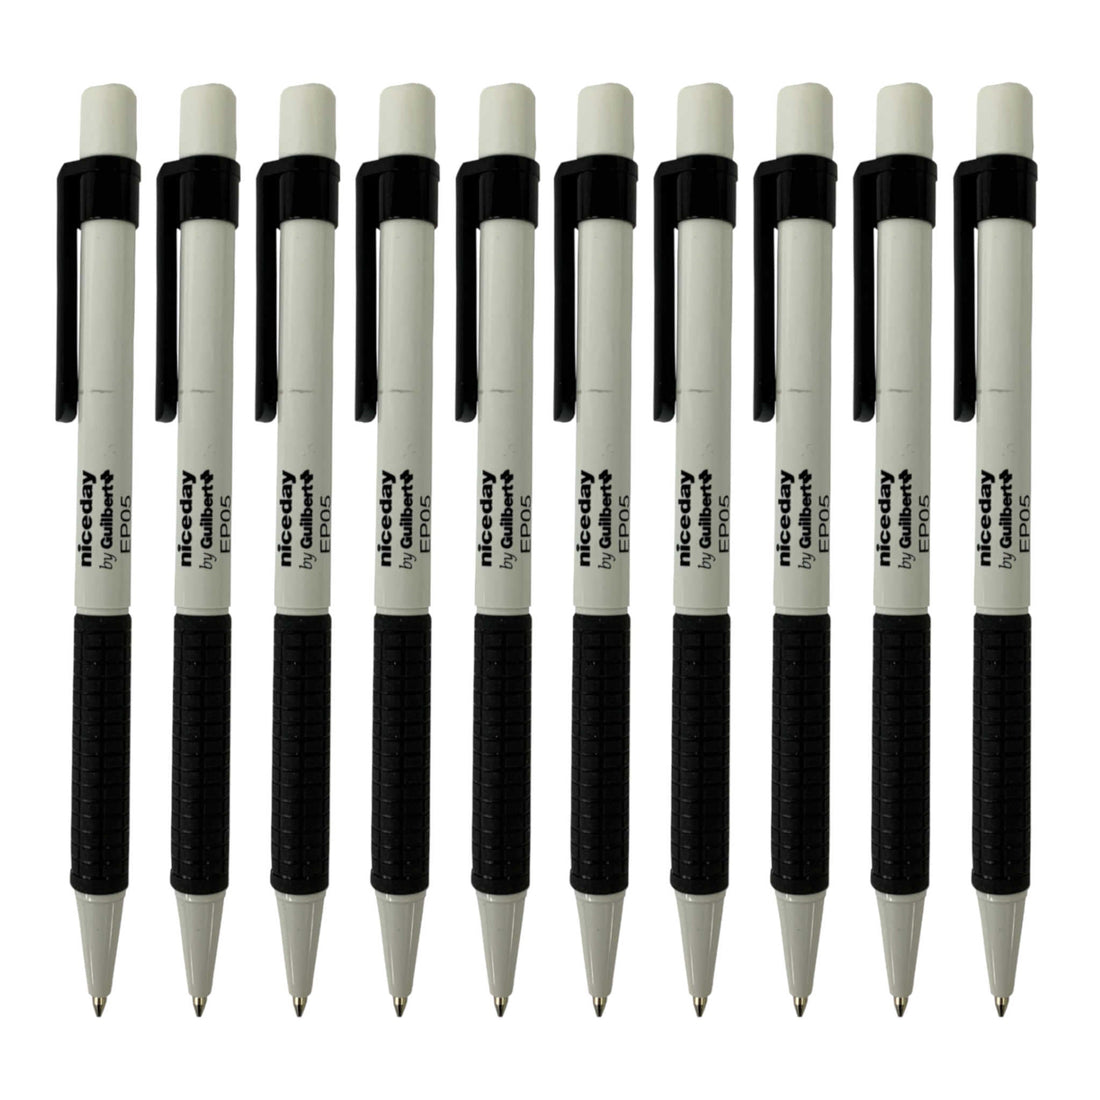 Easygrip Pencils Automatic Pencil with Eraser | 10 Pack